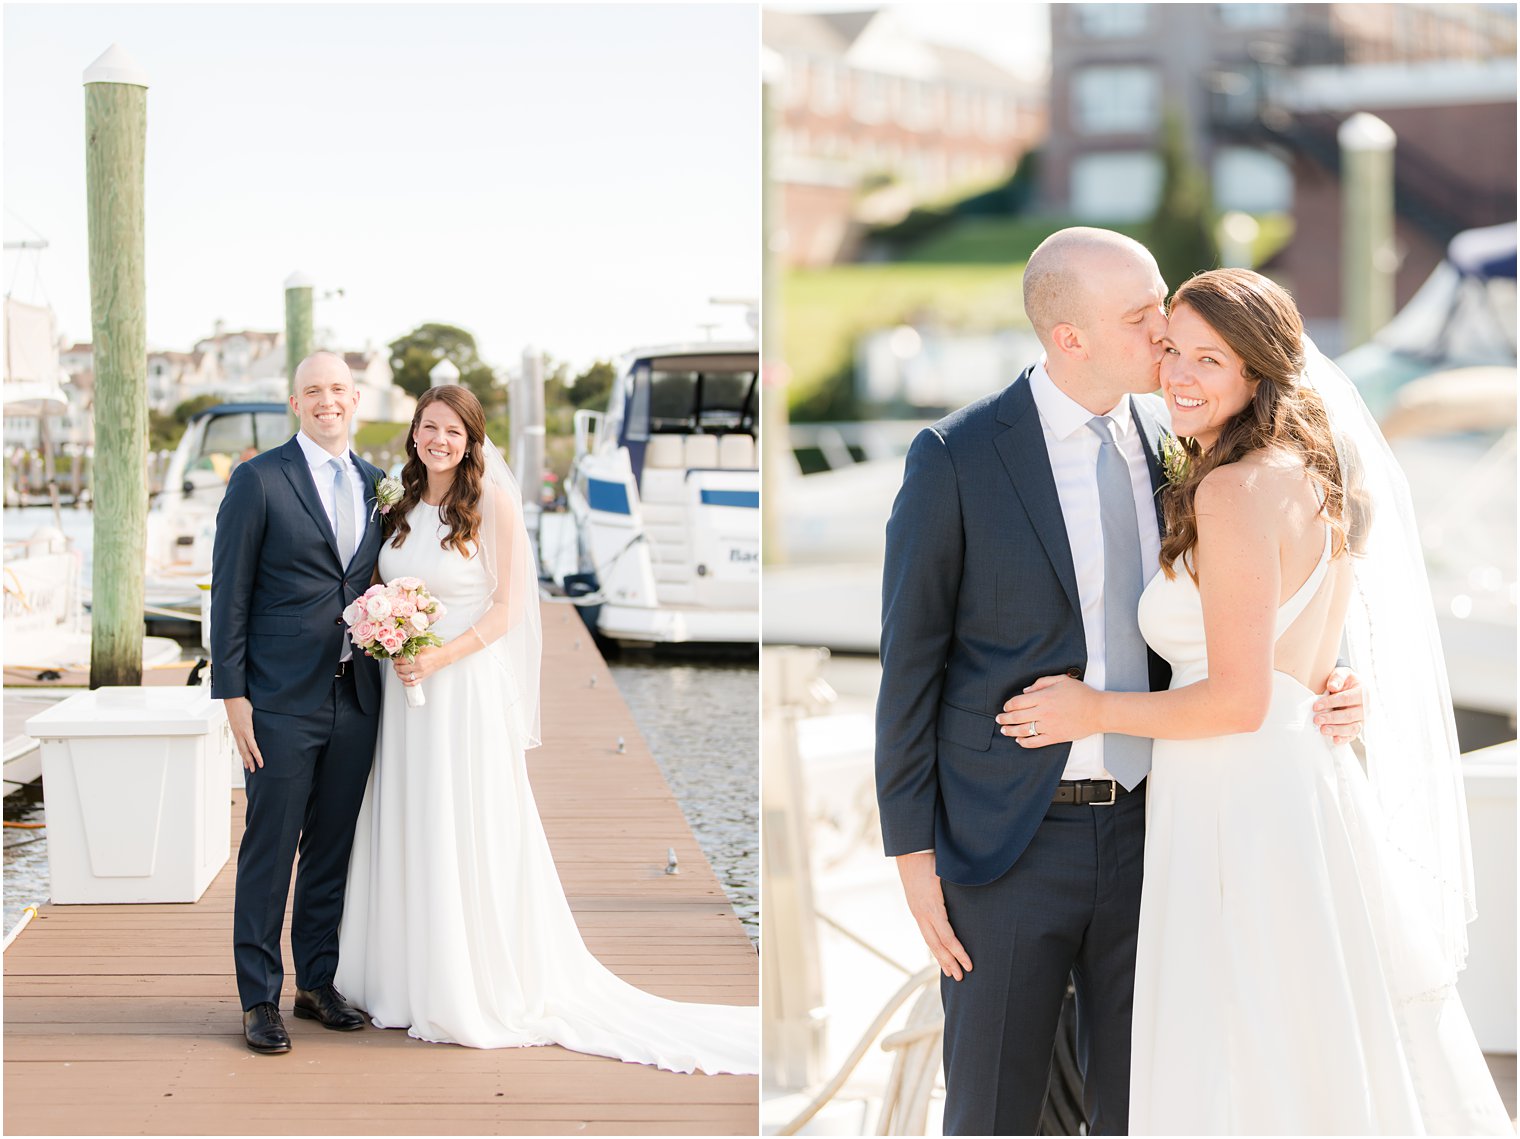 portraits on dock at Molly Pitcher Inn for bride and groom on wedding day 